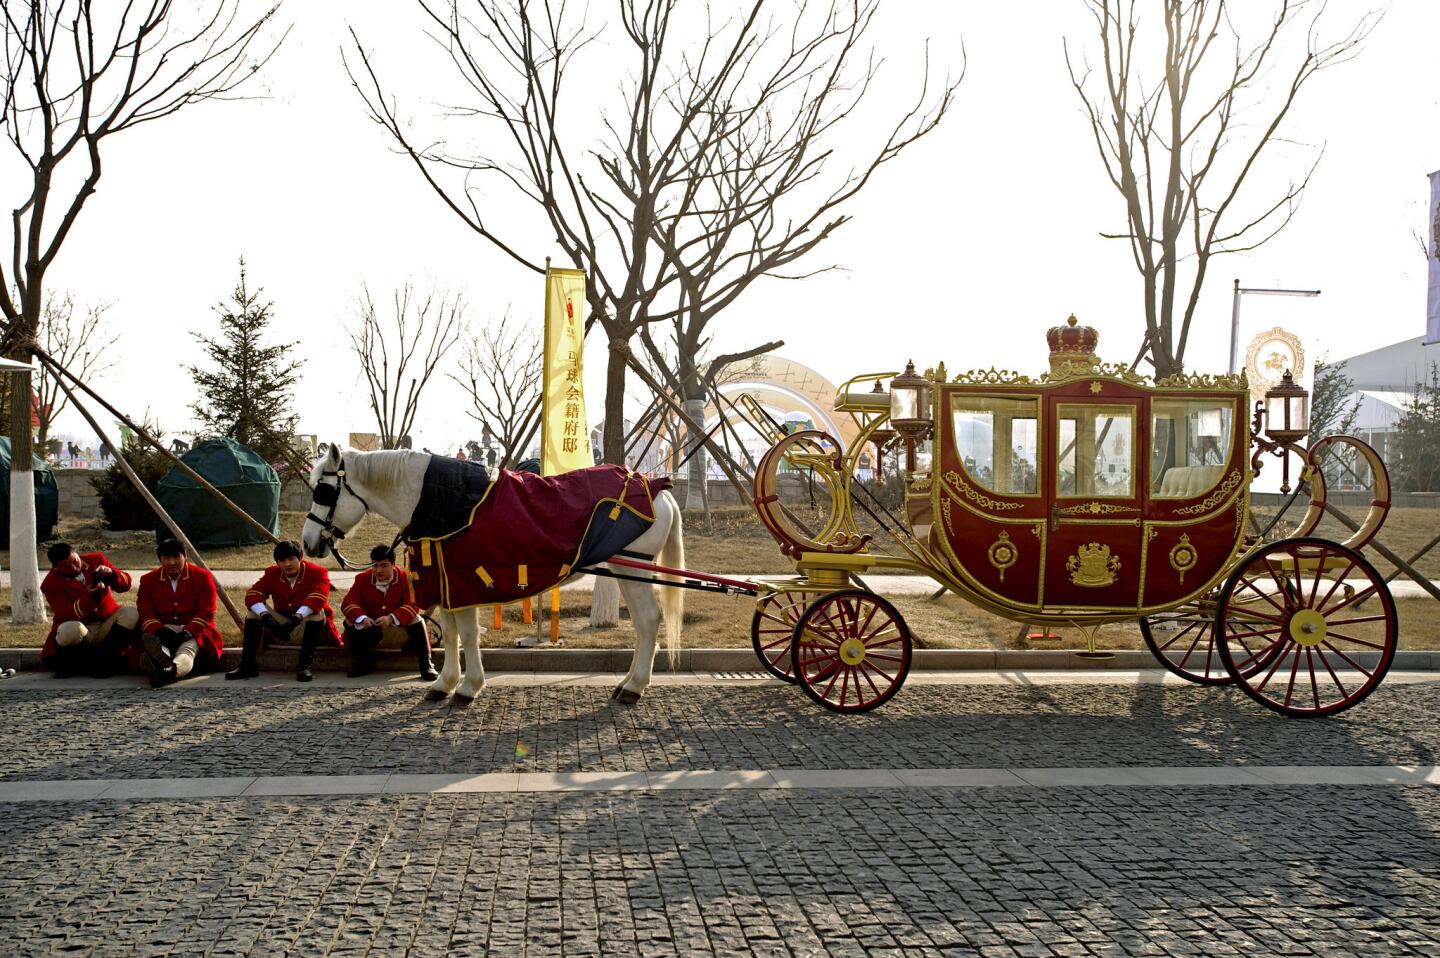 A carriage for the "new nobility"